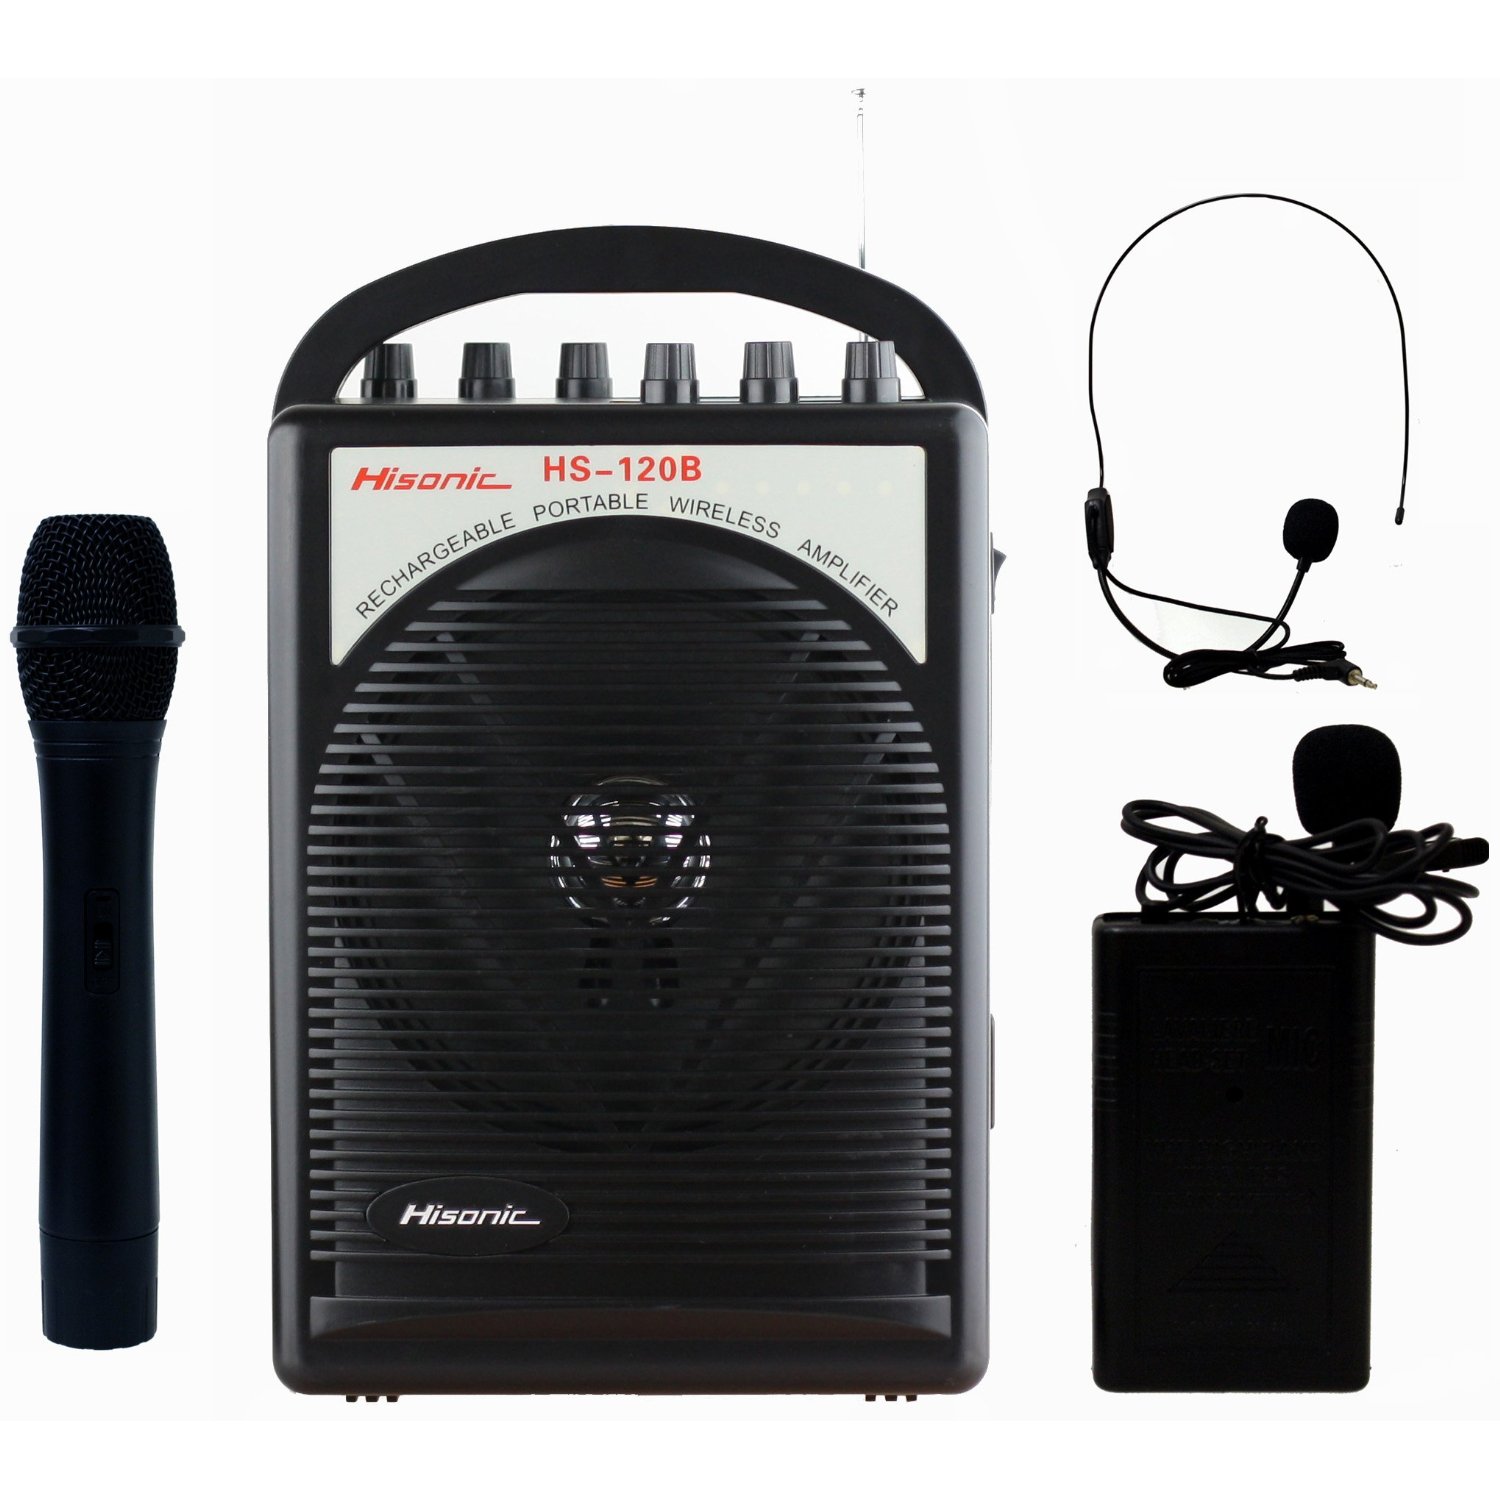 http://thetechjournal.com/wp-content/uploads/images/1110/1319510479-hisonic-hs120b-portable-pa-system-with-wireless-microphones-1.jpg